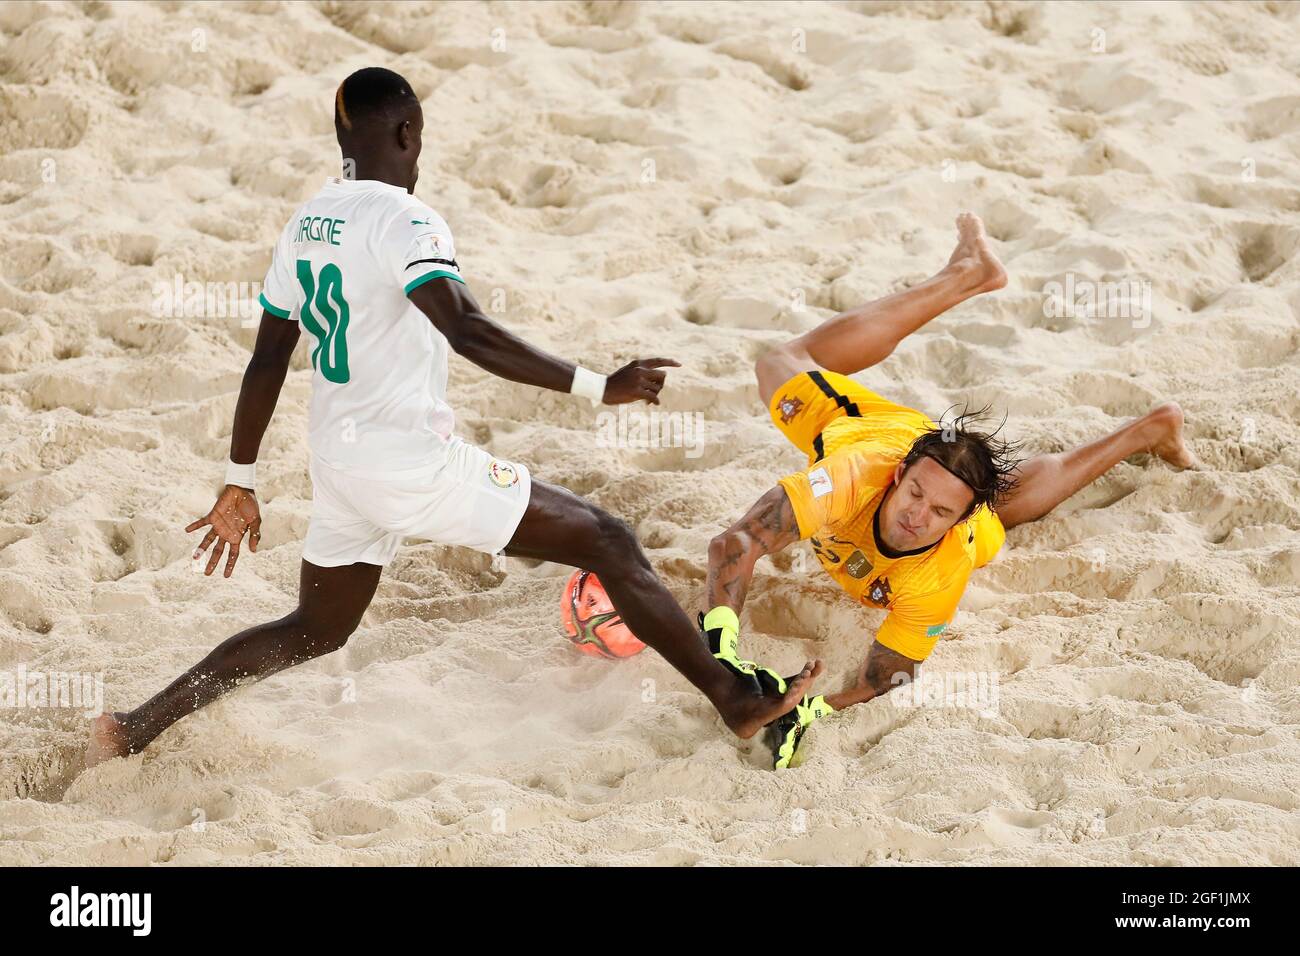 Moscow, Russia. 22nd August 2021; Luzhniki Stadium, Moscow, Russia: FIFA World Cup Beach Football tournament; Elinton Andrade from Portugal challenges Mamour Diagne from Senegal, during the match between Portugal and Senegal, in the 2nd round of Group D Credit: Action Plus Sports Images/Alamy Live News Stock Photo